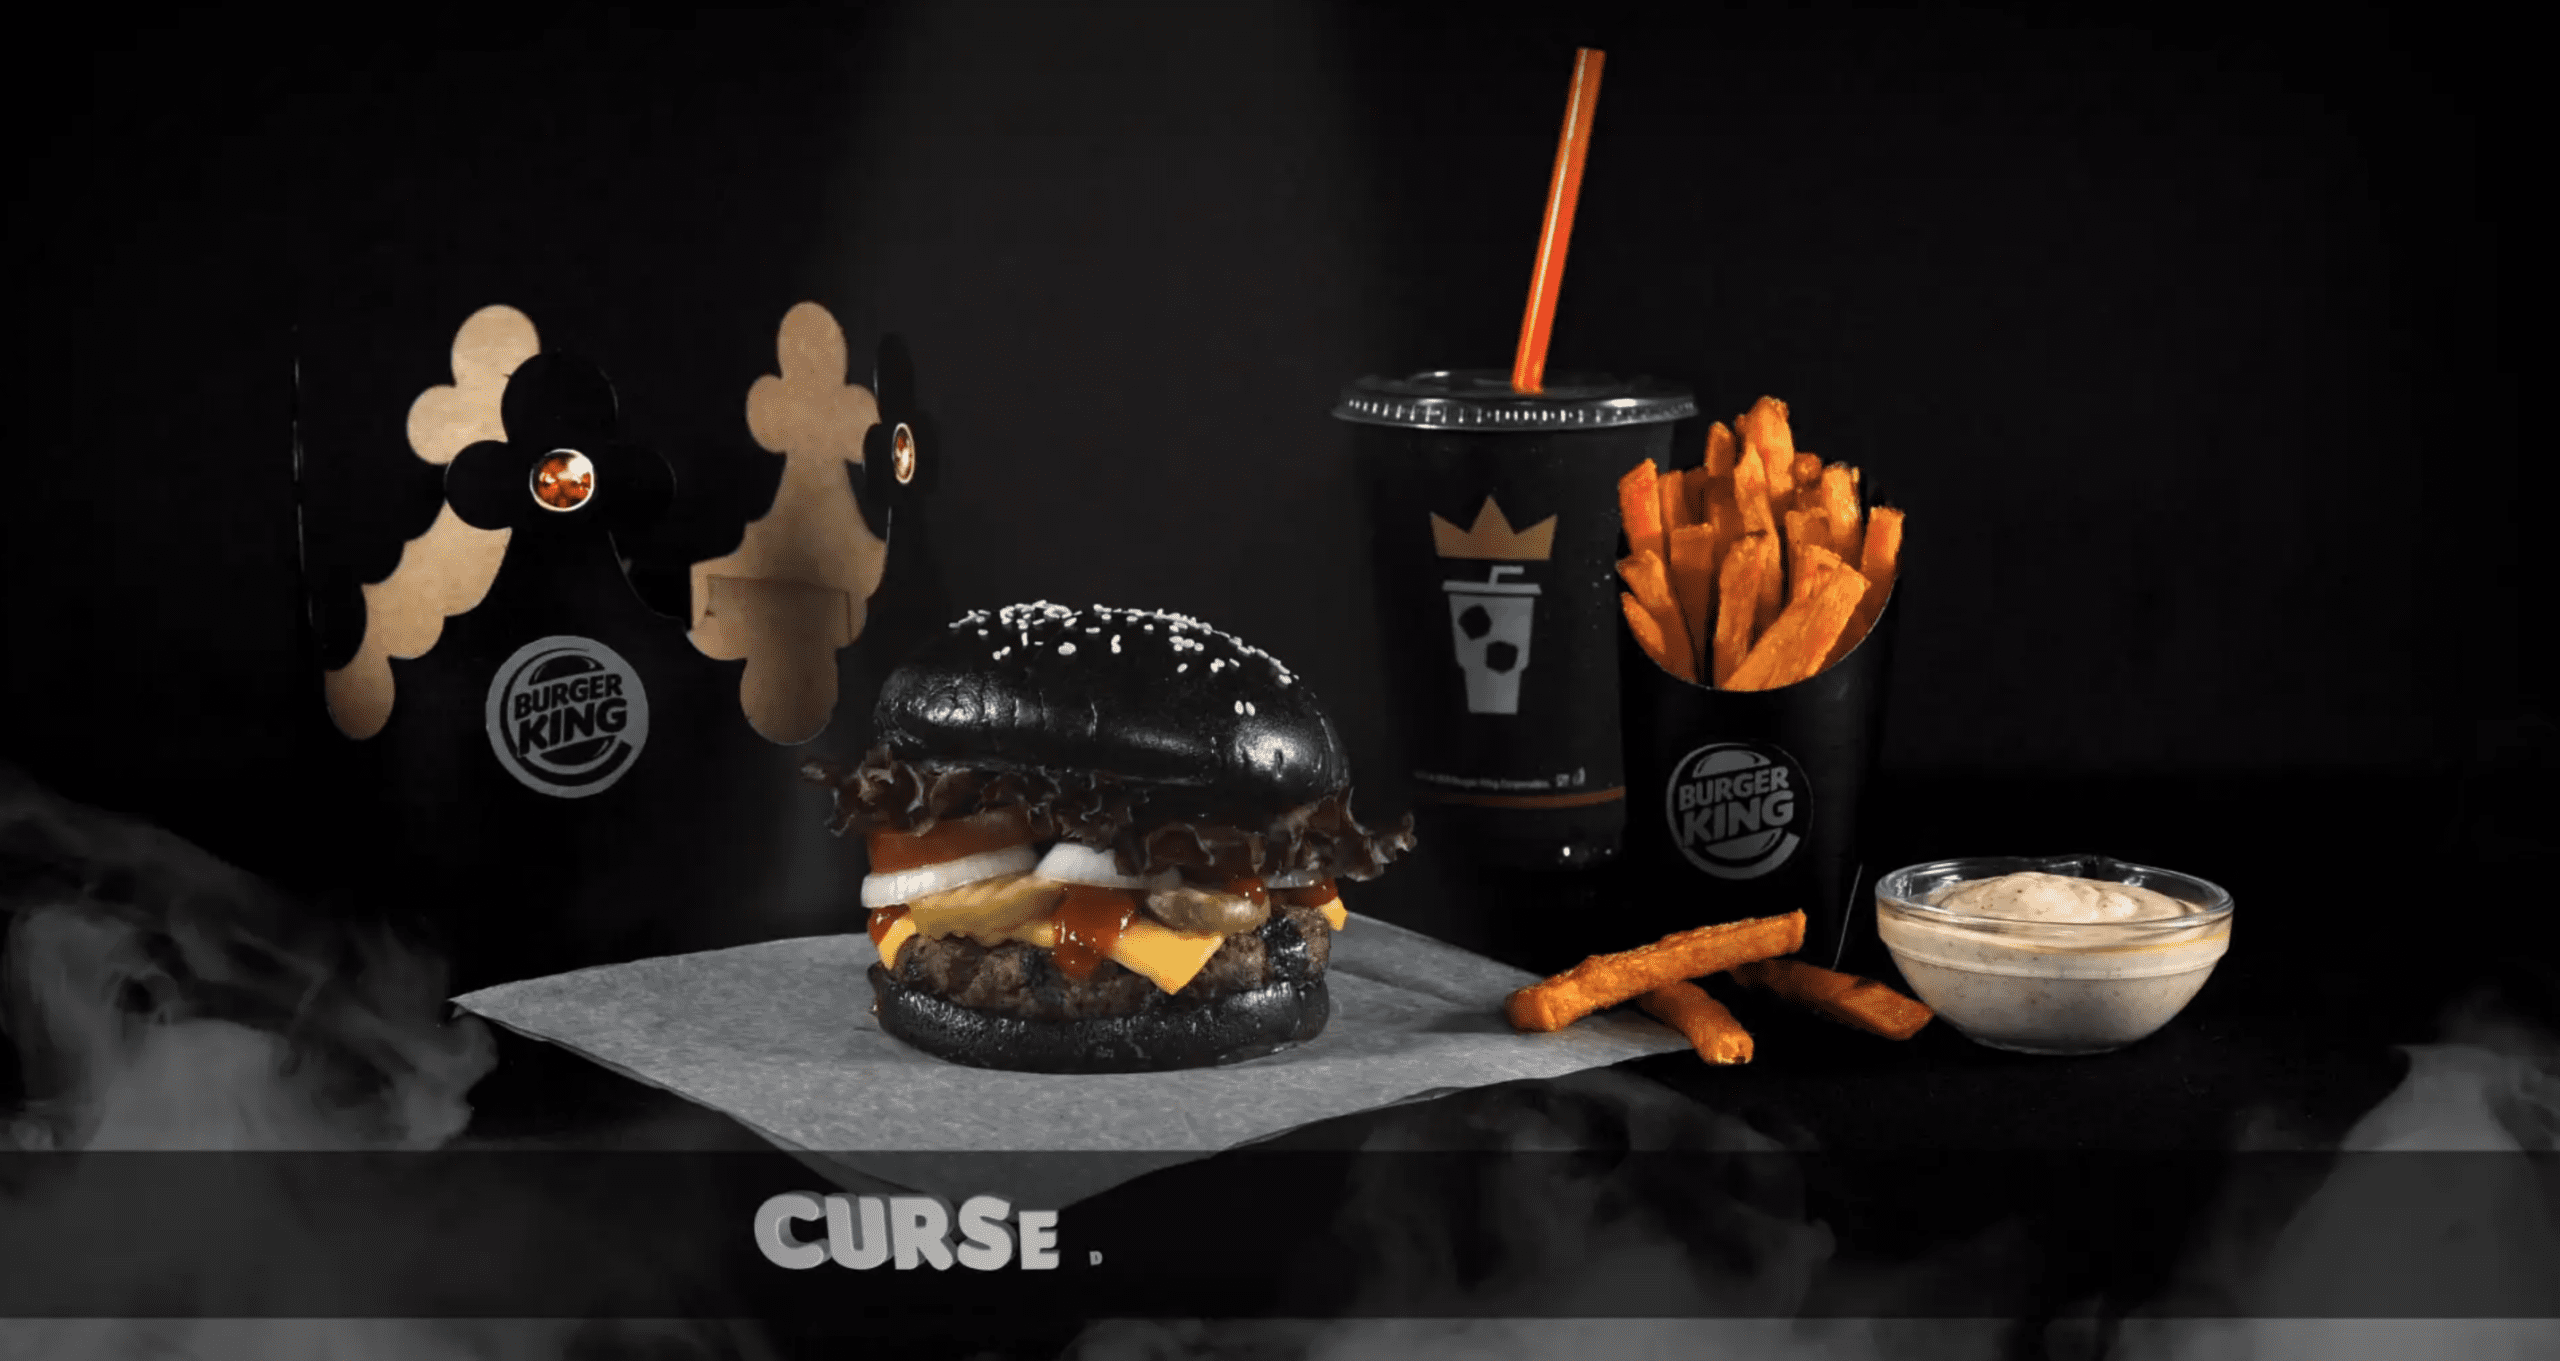 Advertisement for Burger King. Shows a paper crown, cup of fried, and soda cup, which are all black. In the center is a burger with black buns. The background is also black.